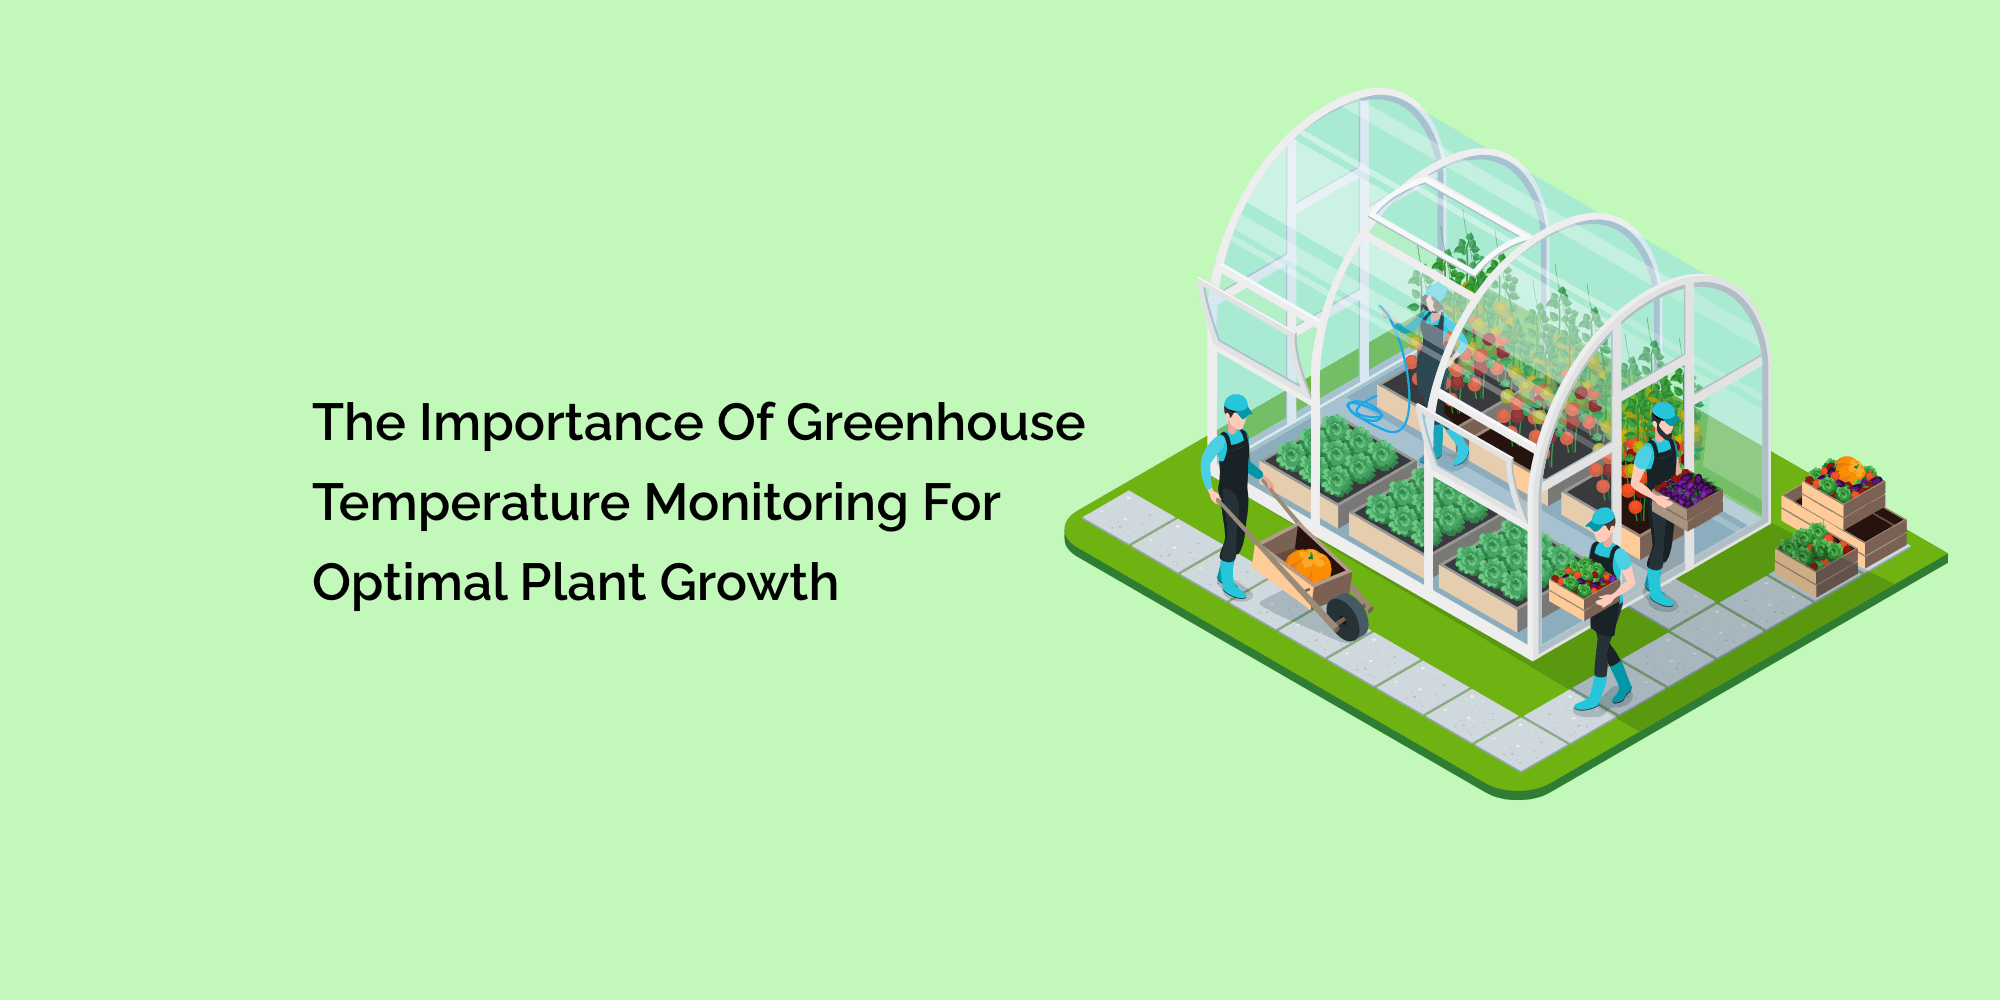 The Importance of Greenhouse Temperature Monitoring for Optimal Plant Growth